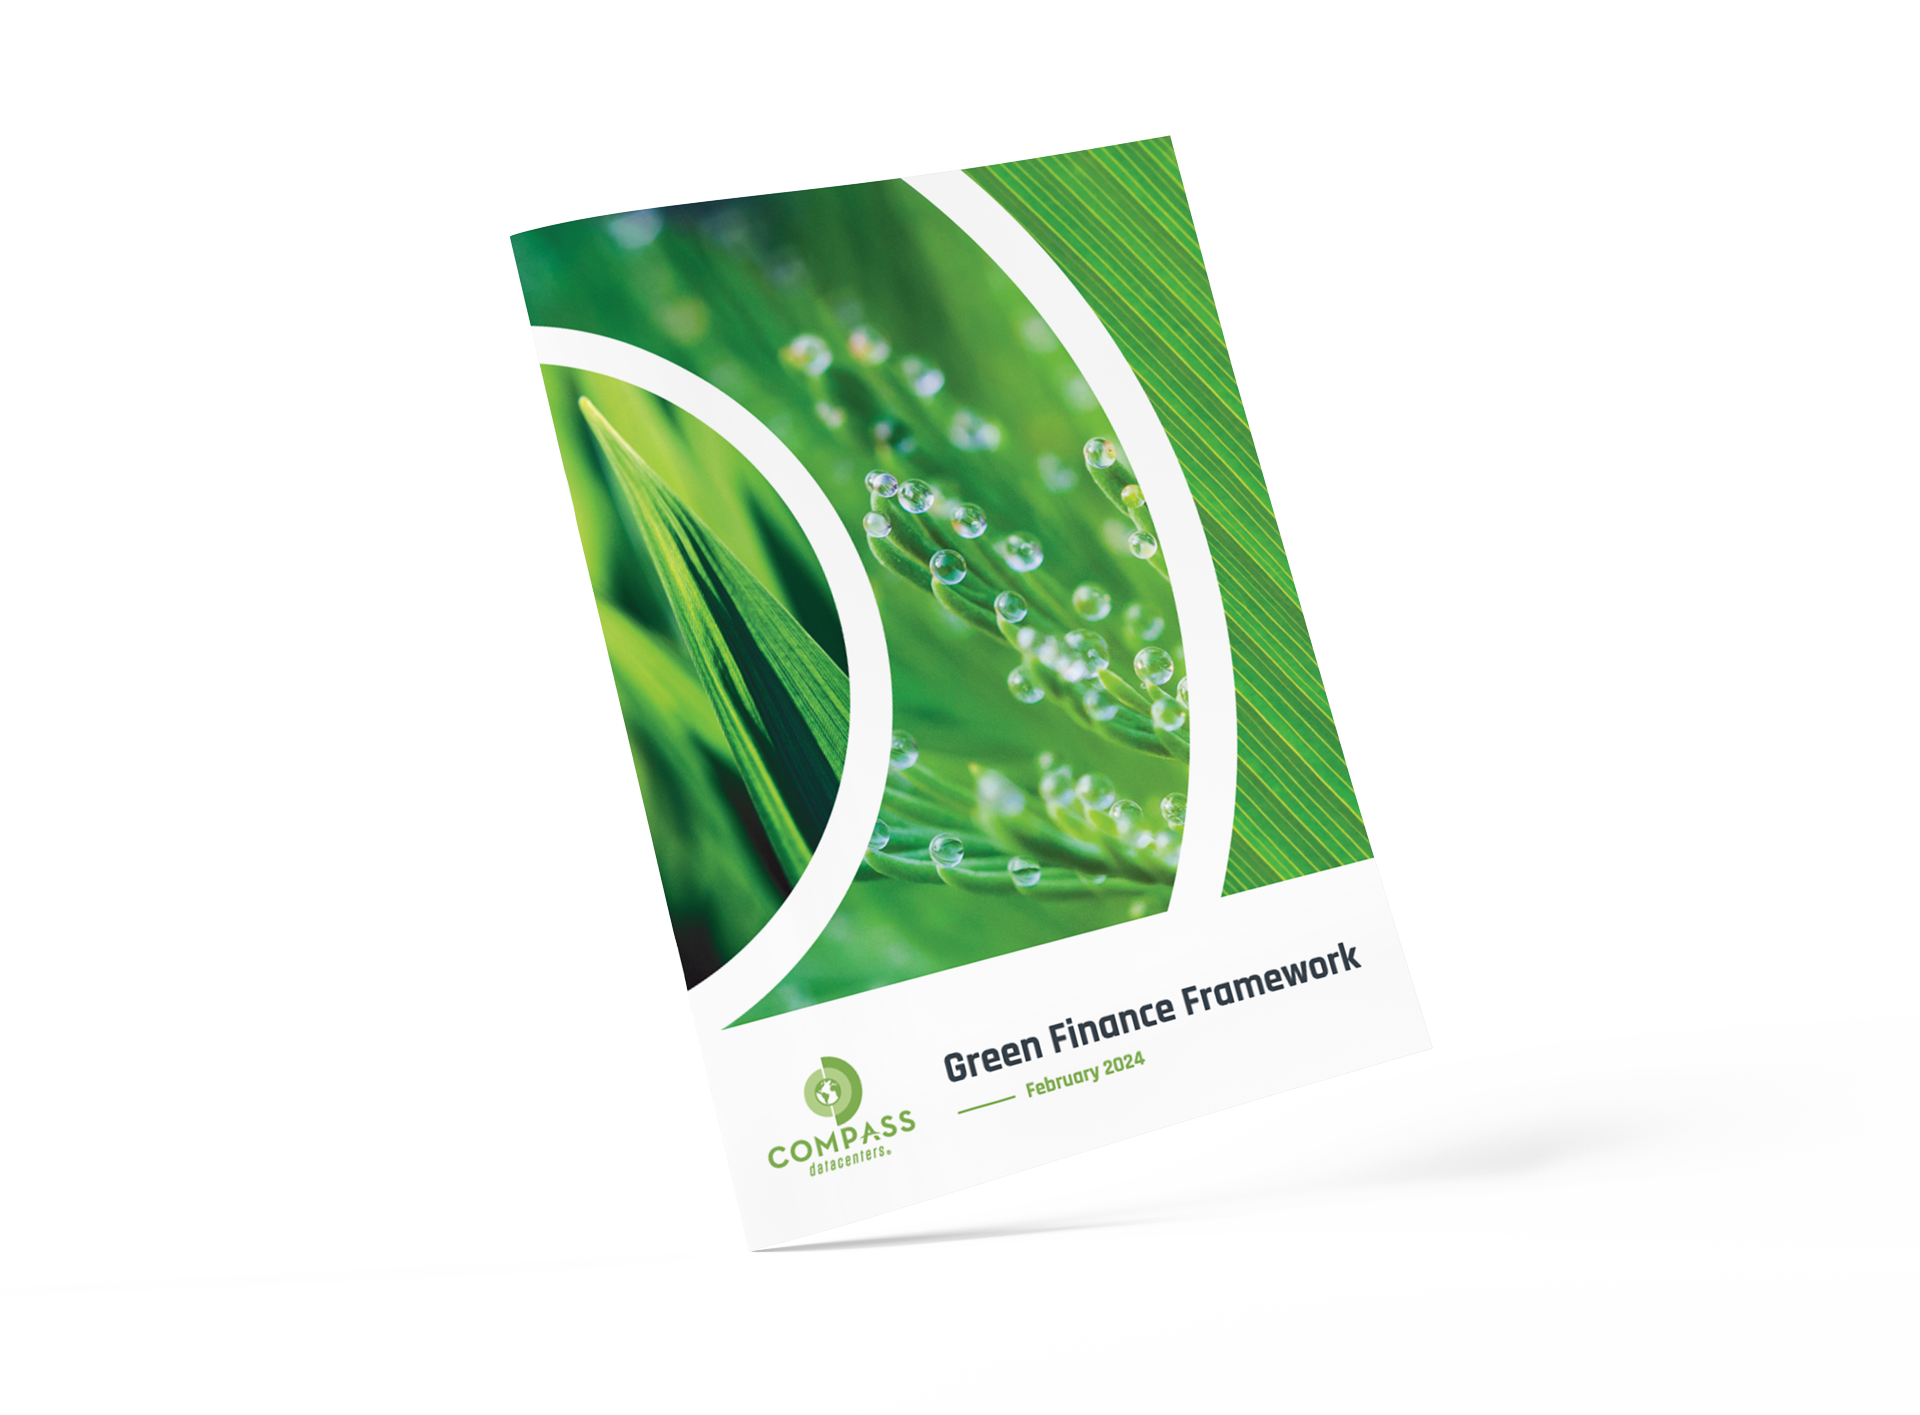 This is an image of a brochure titled "Green Finance Framework" by Compass, dated February 2024, featuring a nature-inspired design with dew on leaves.